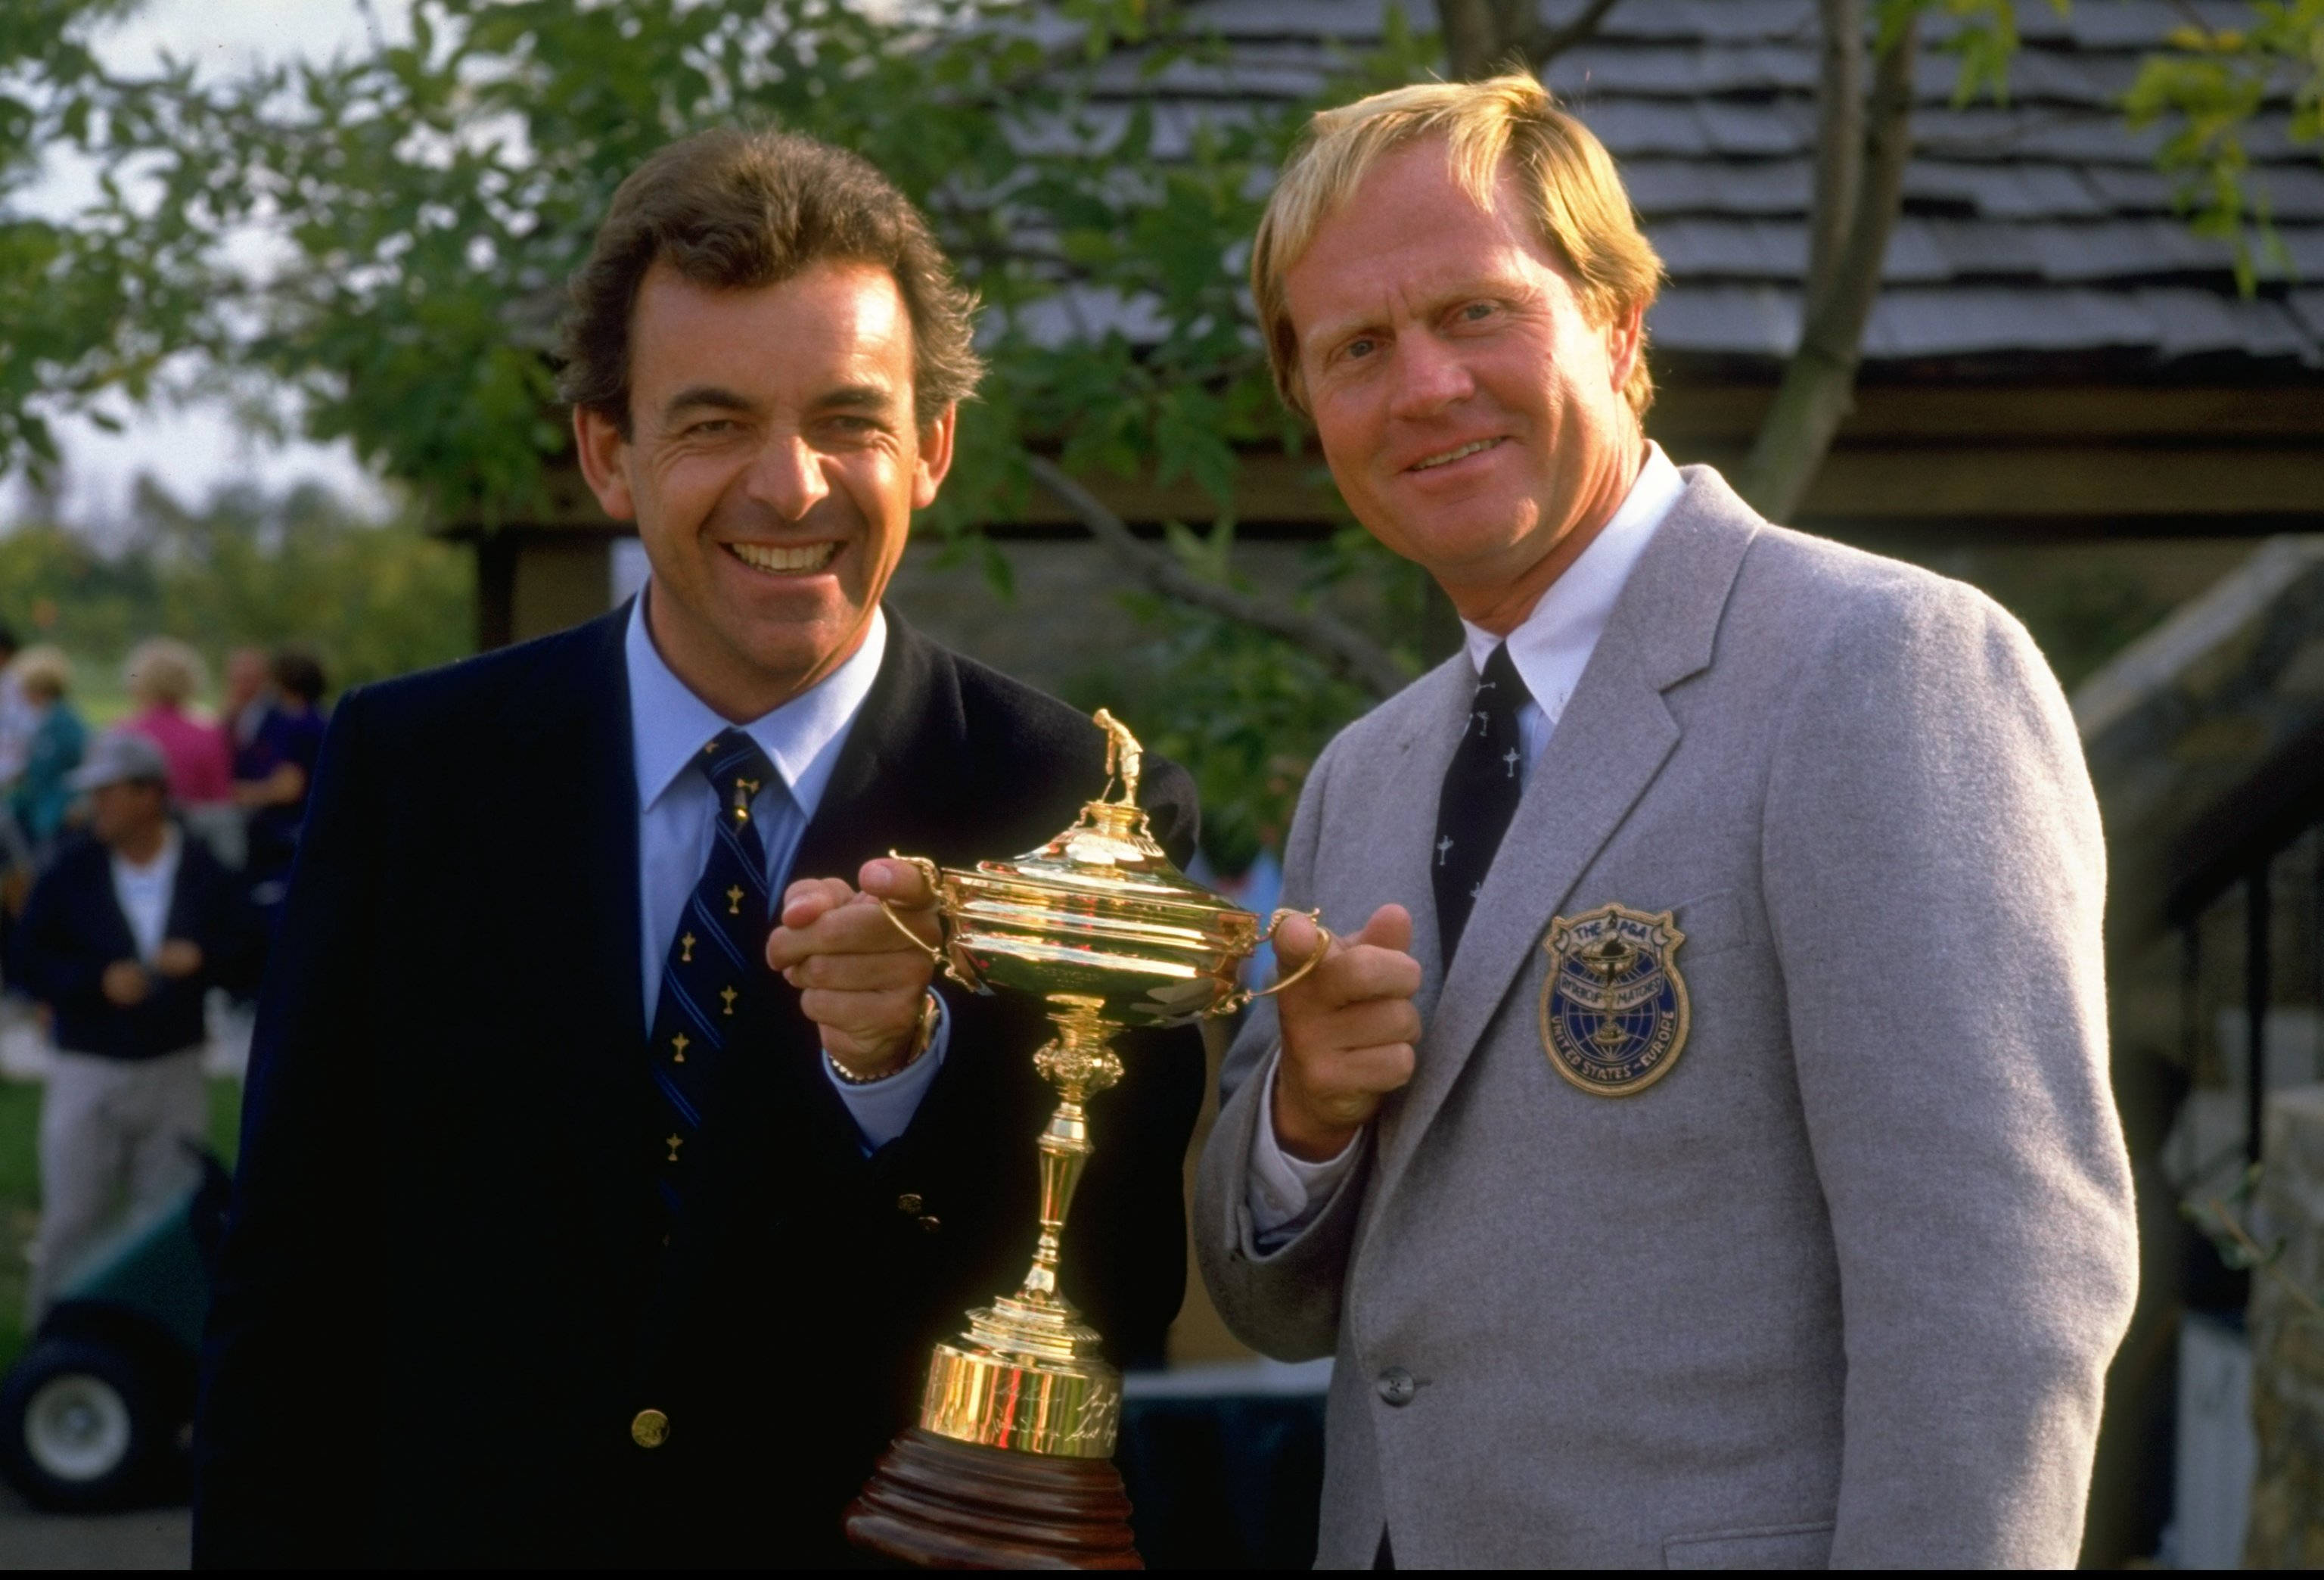 1987:  Team Captains Tony Jacklin (left) of England and Jack Nicklaus (right) of the USA hold the trophy before the Ryder Cup at Muirfield Village in Ohio, USA. Europe won the event with a score of 15-13.  \ Mandatory Credit: David  Cannon/Allsport